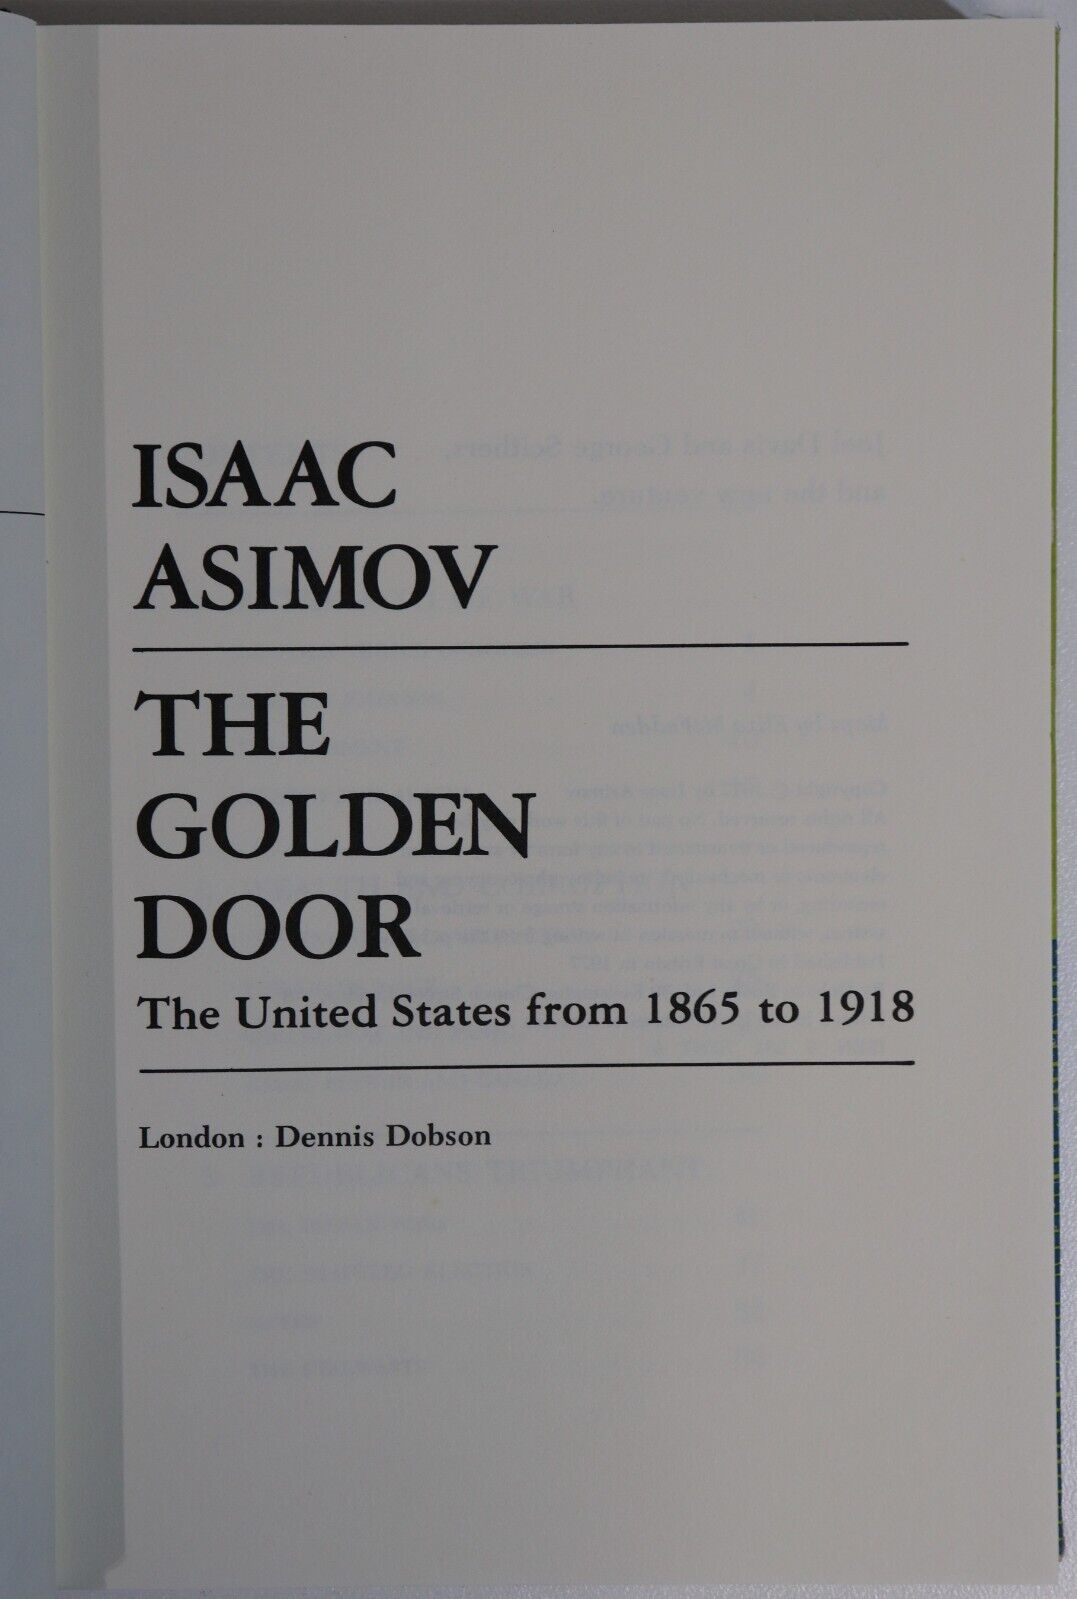 The Golden Door by Isaac Asimov - 1977 - Vintage American History Book